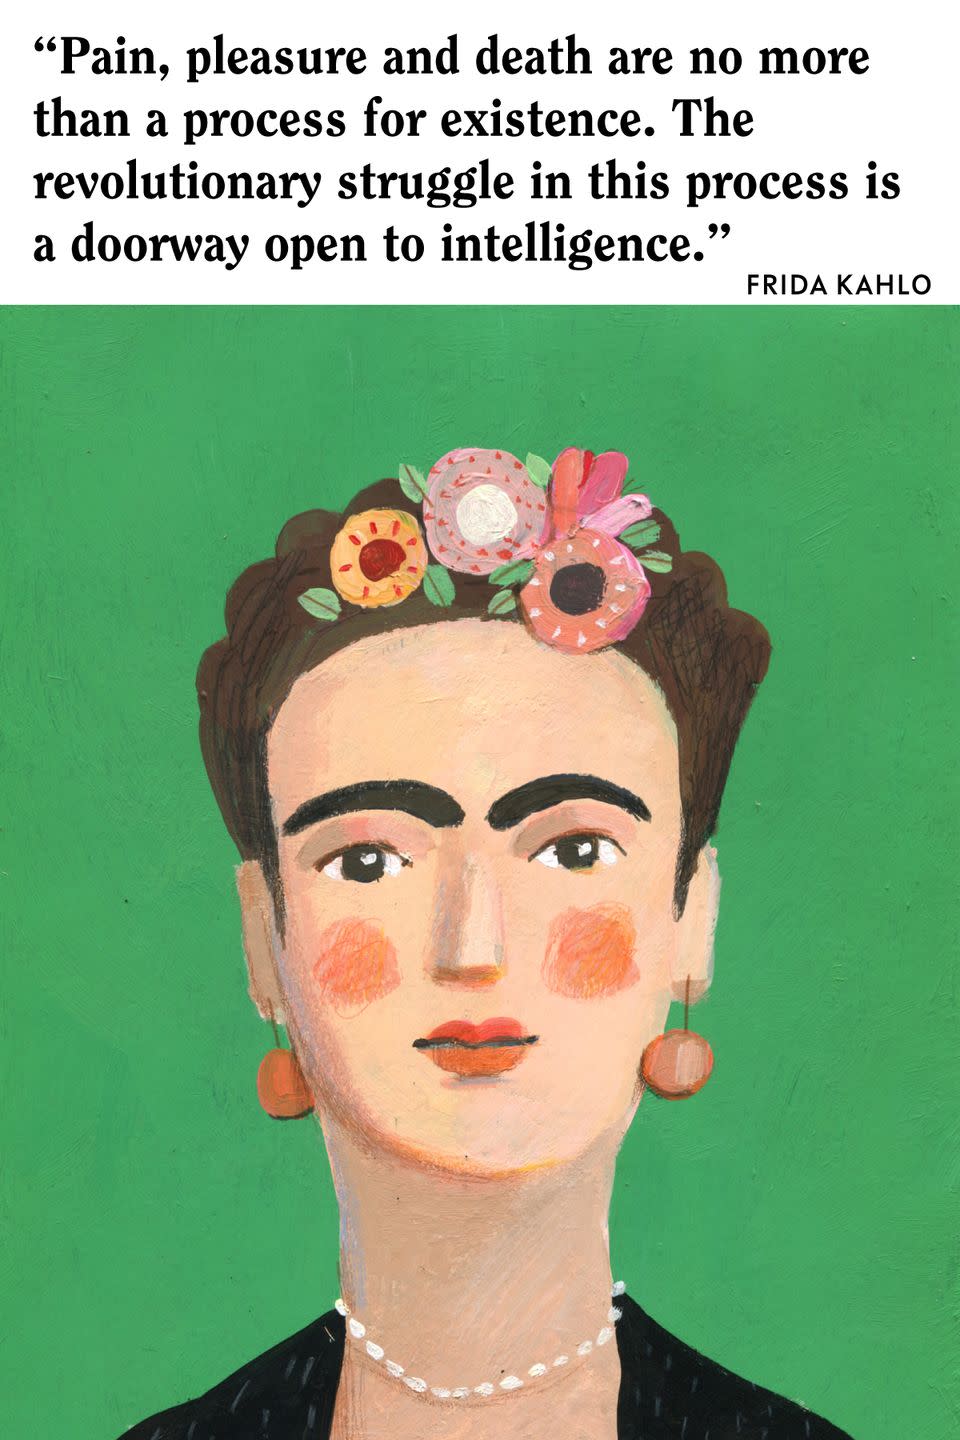 These Frida Kahlo Quotes Are as Evocative as Her Paintings